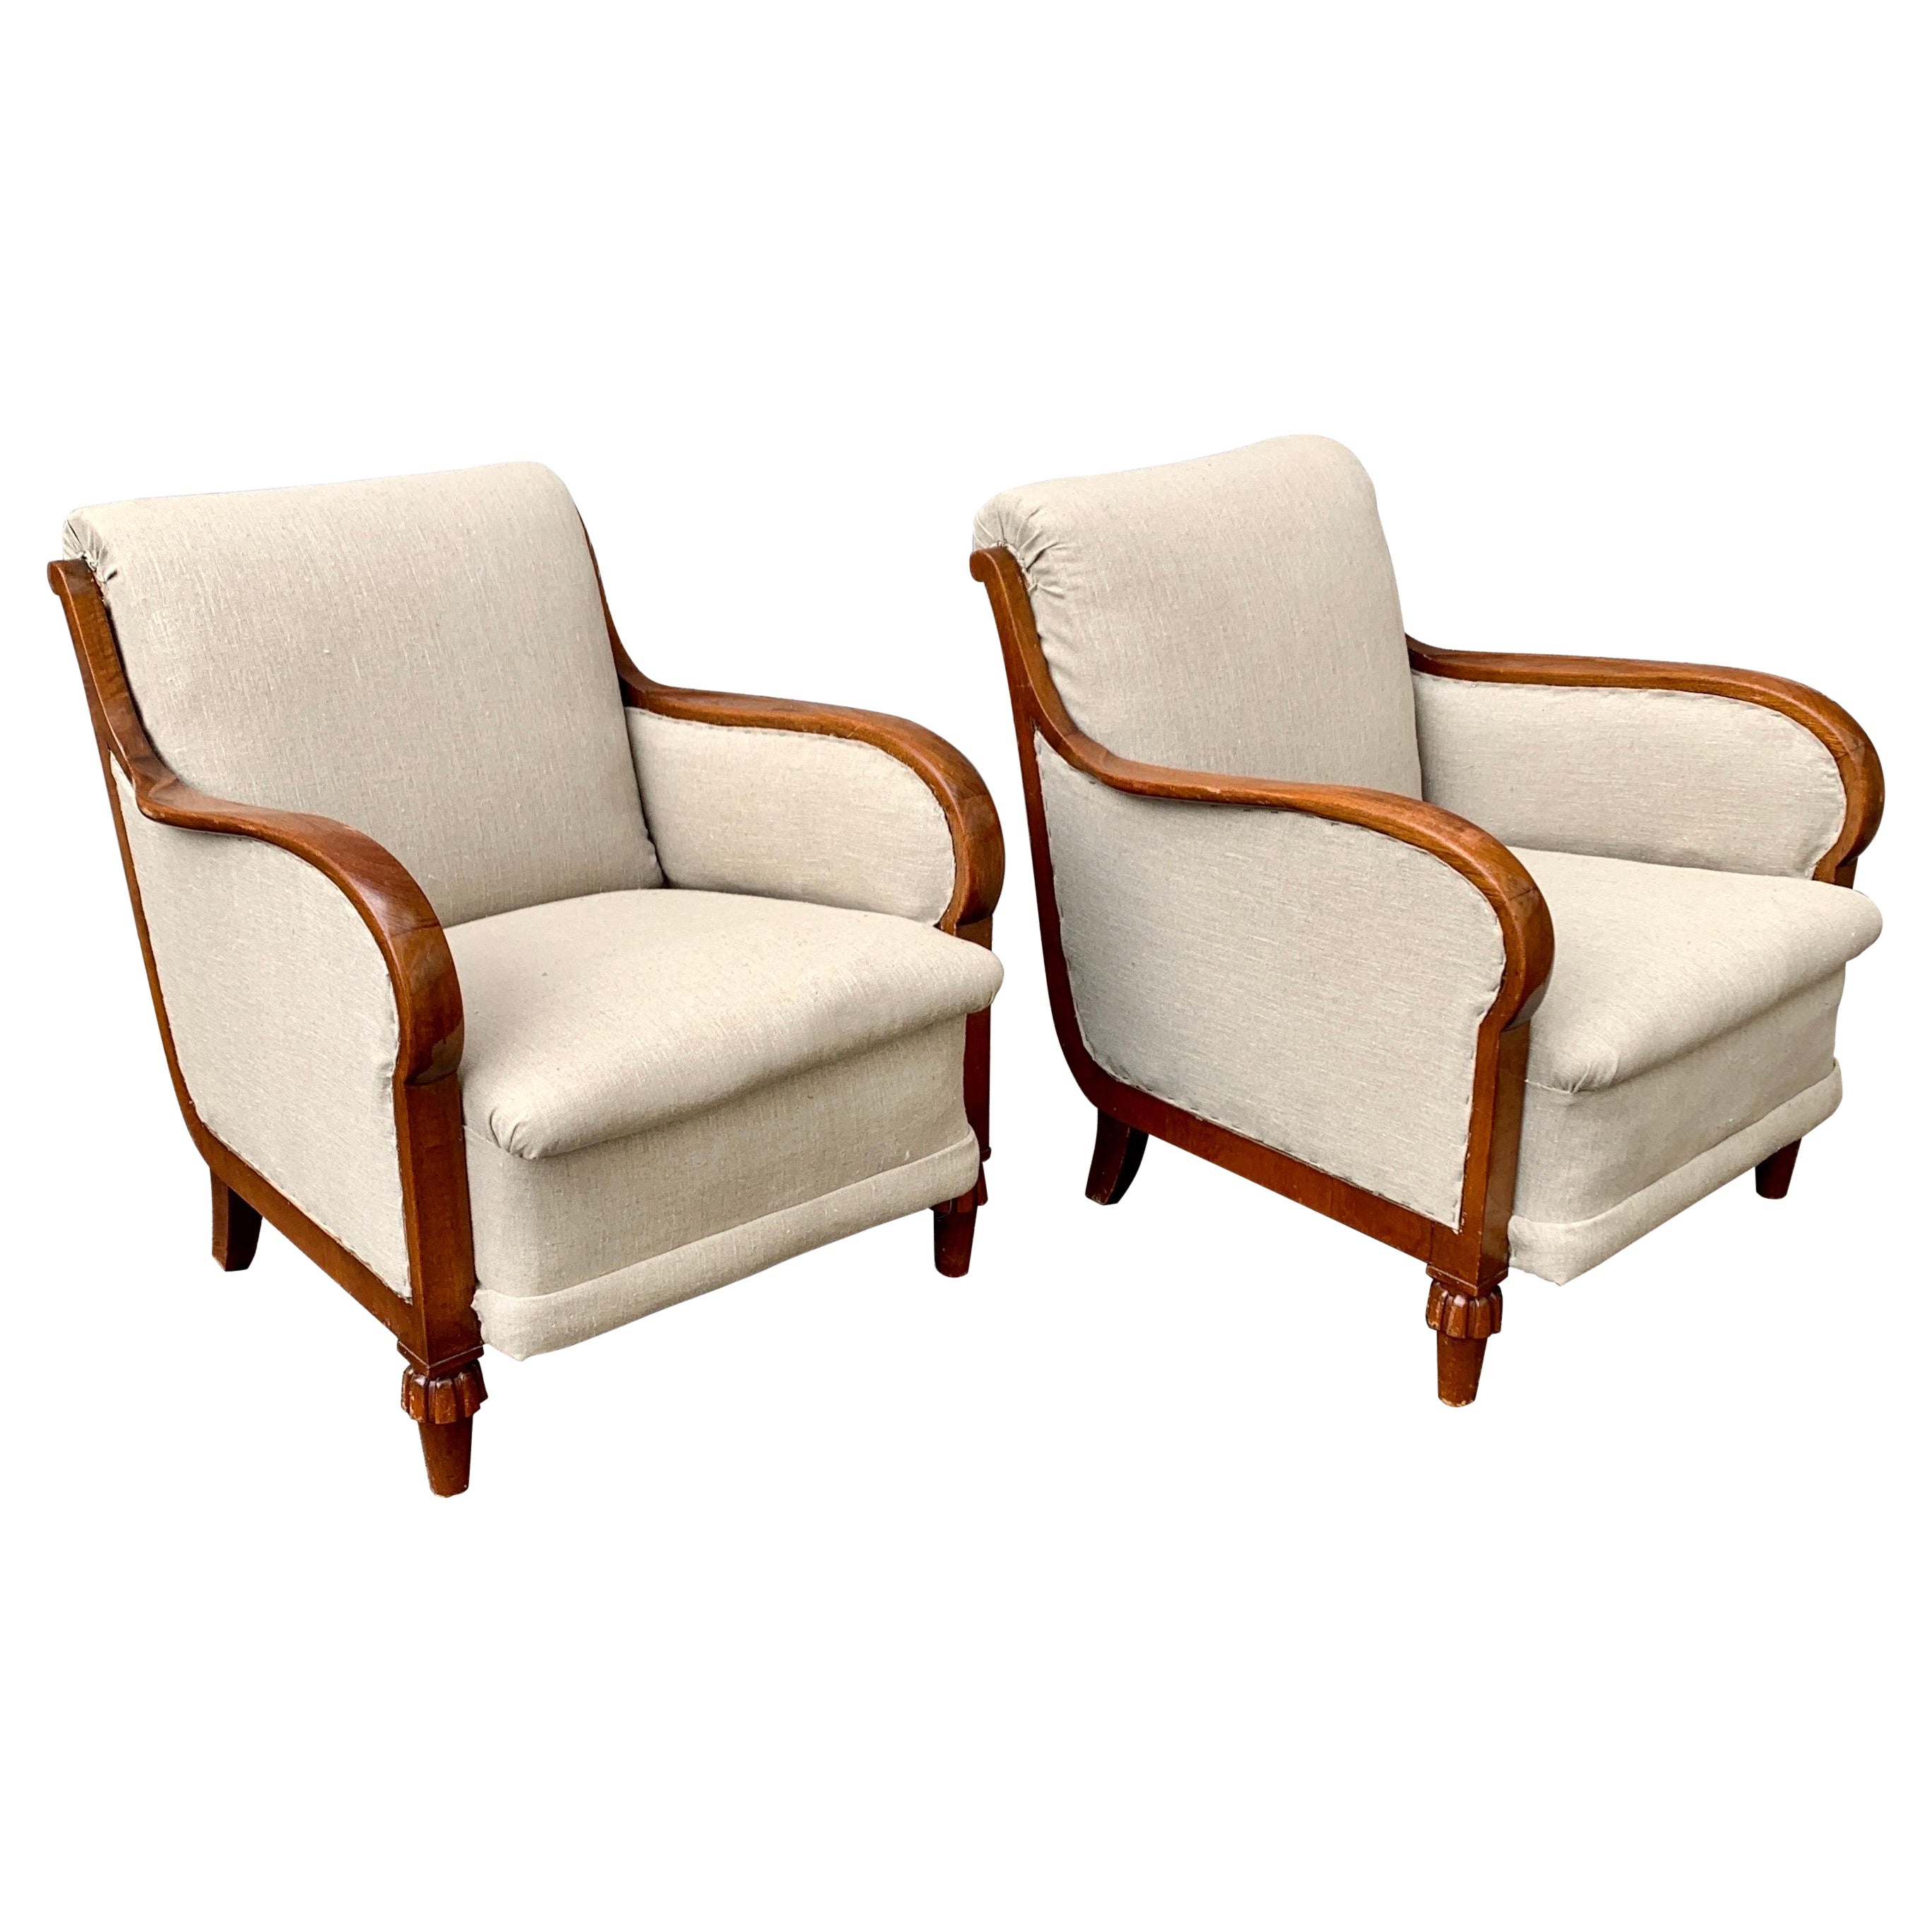 Pair of Large Swedish 19th Cantury Oak Armchairs in Beige Fabric For Sale